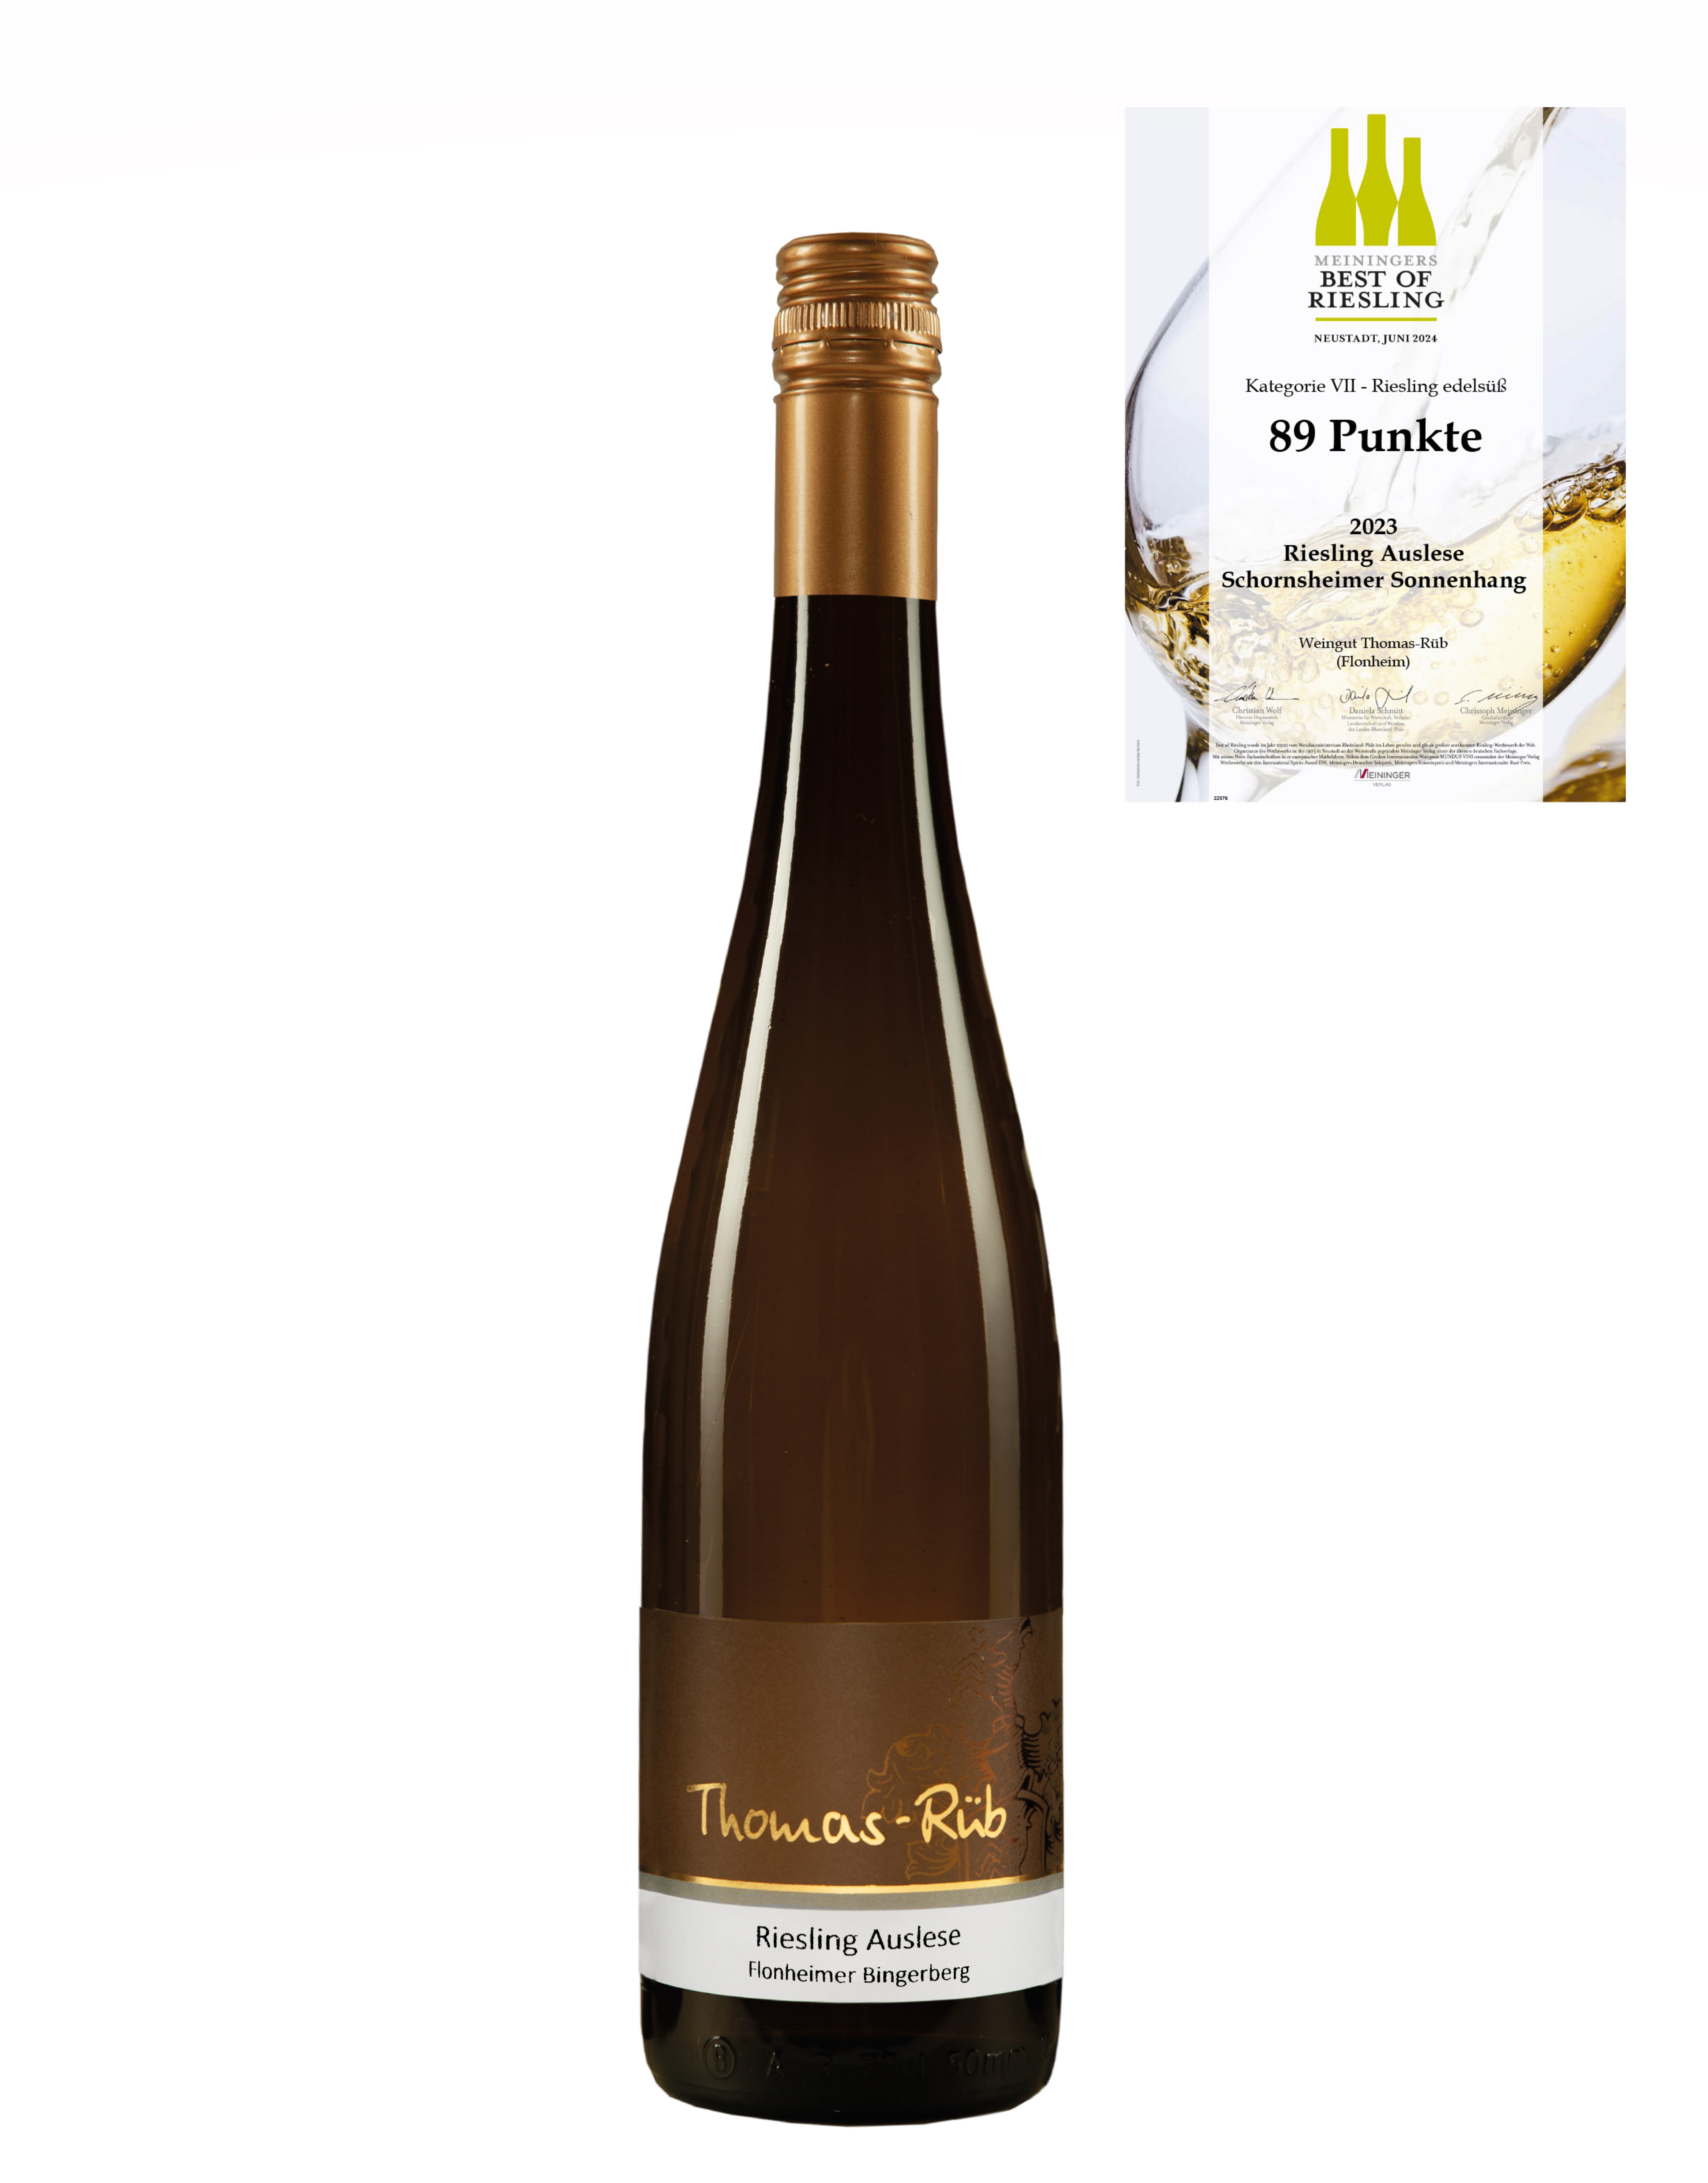 2023 RIESLING AUSLESE